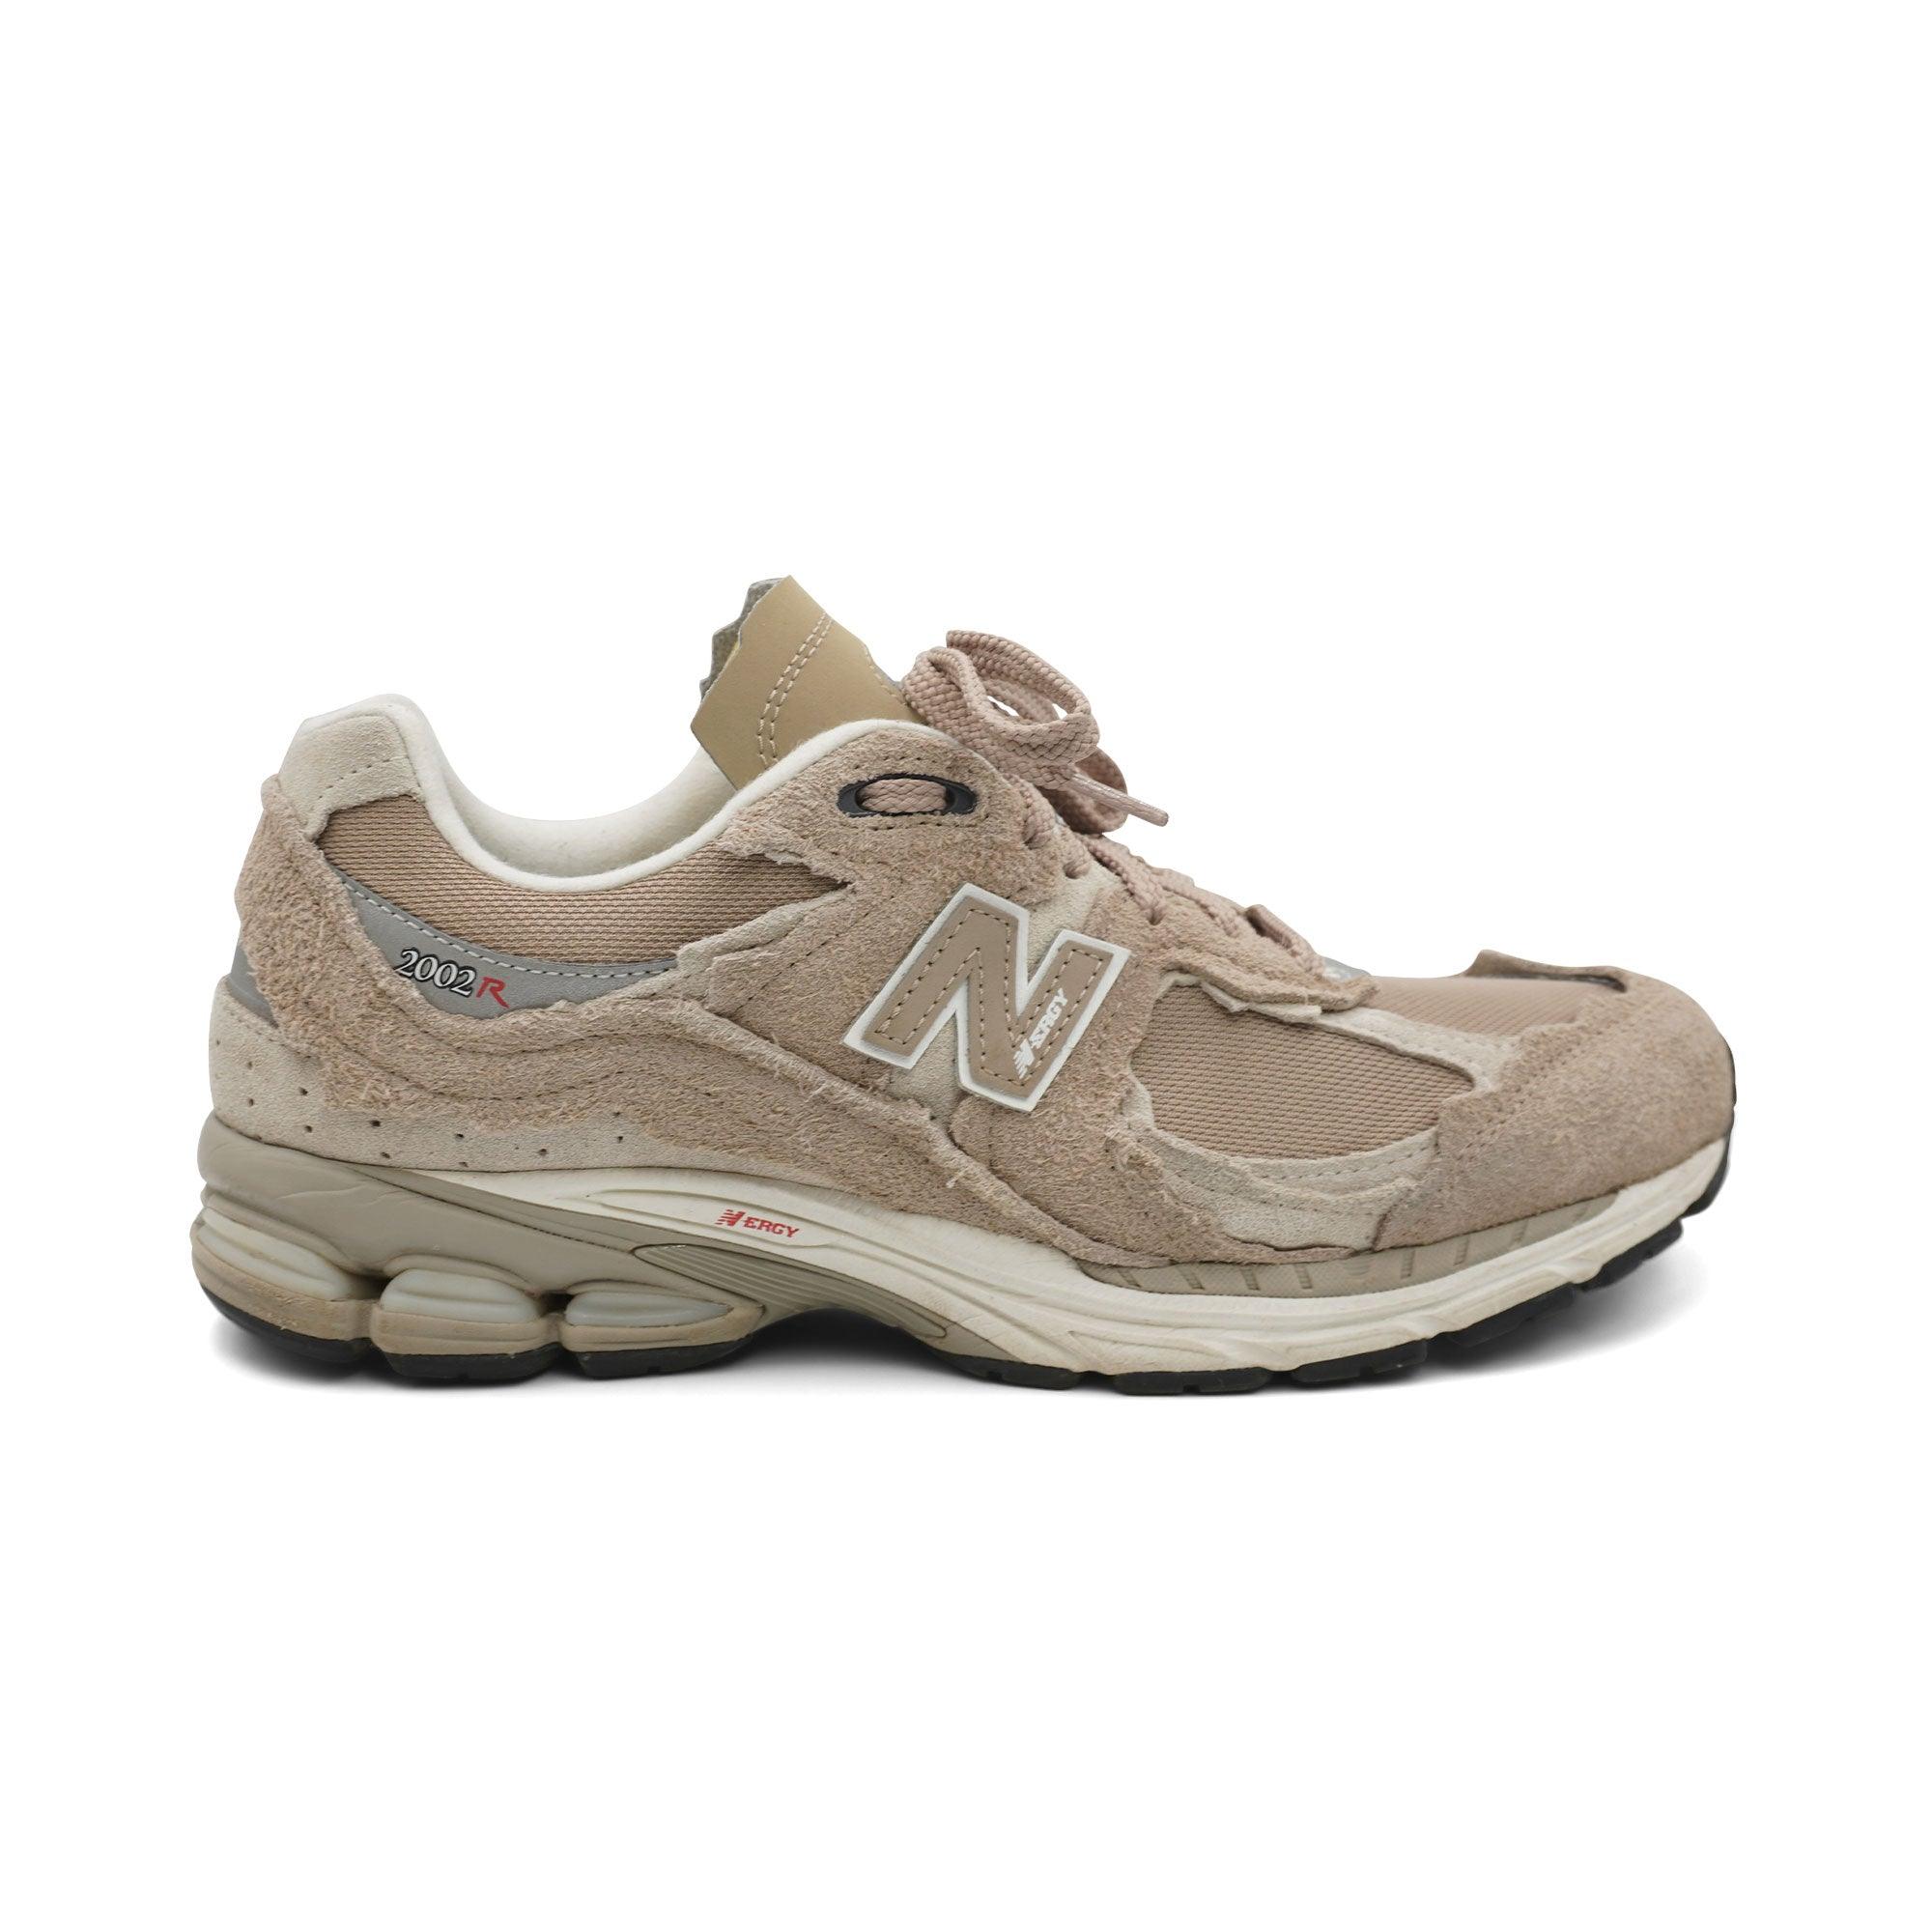 New Balance '2002R' Sneakers - Men's 9.5 - Fashionably Yours